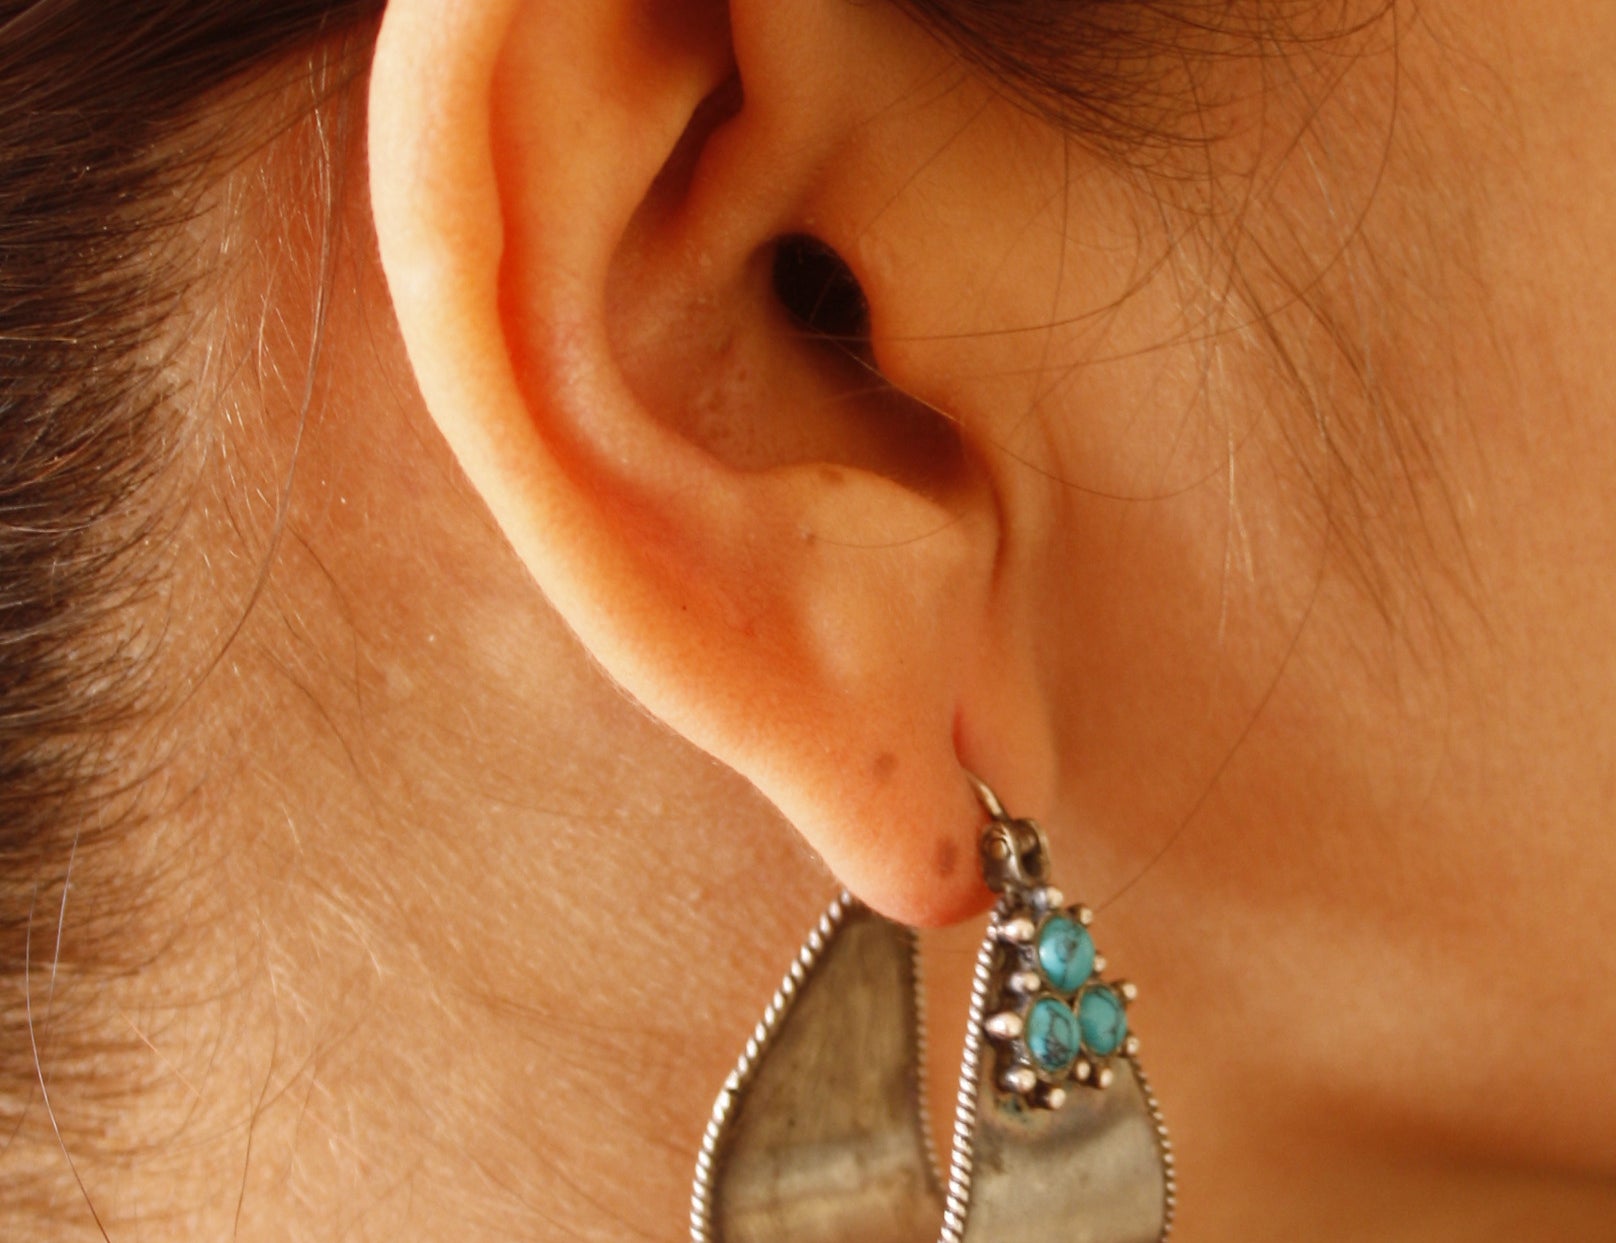 Buy online silver earring designs  - Quirksmith